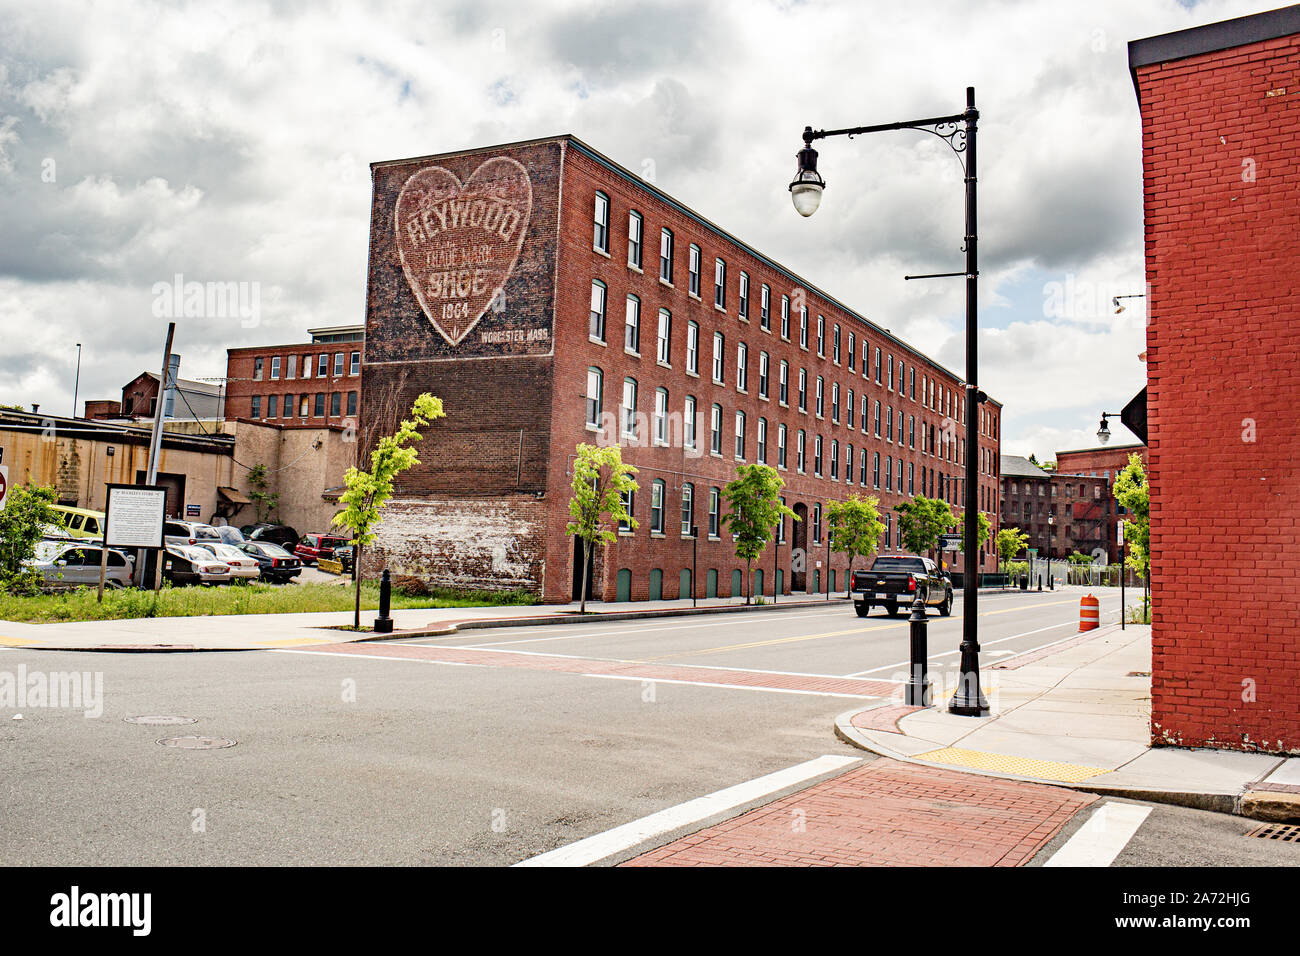 The old Heywood Shoe factory building in Worcester, MA Stock Photo